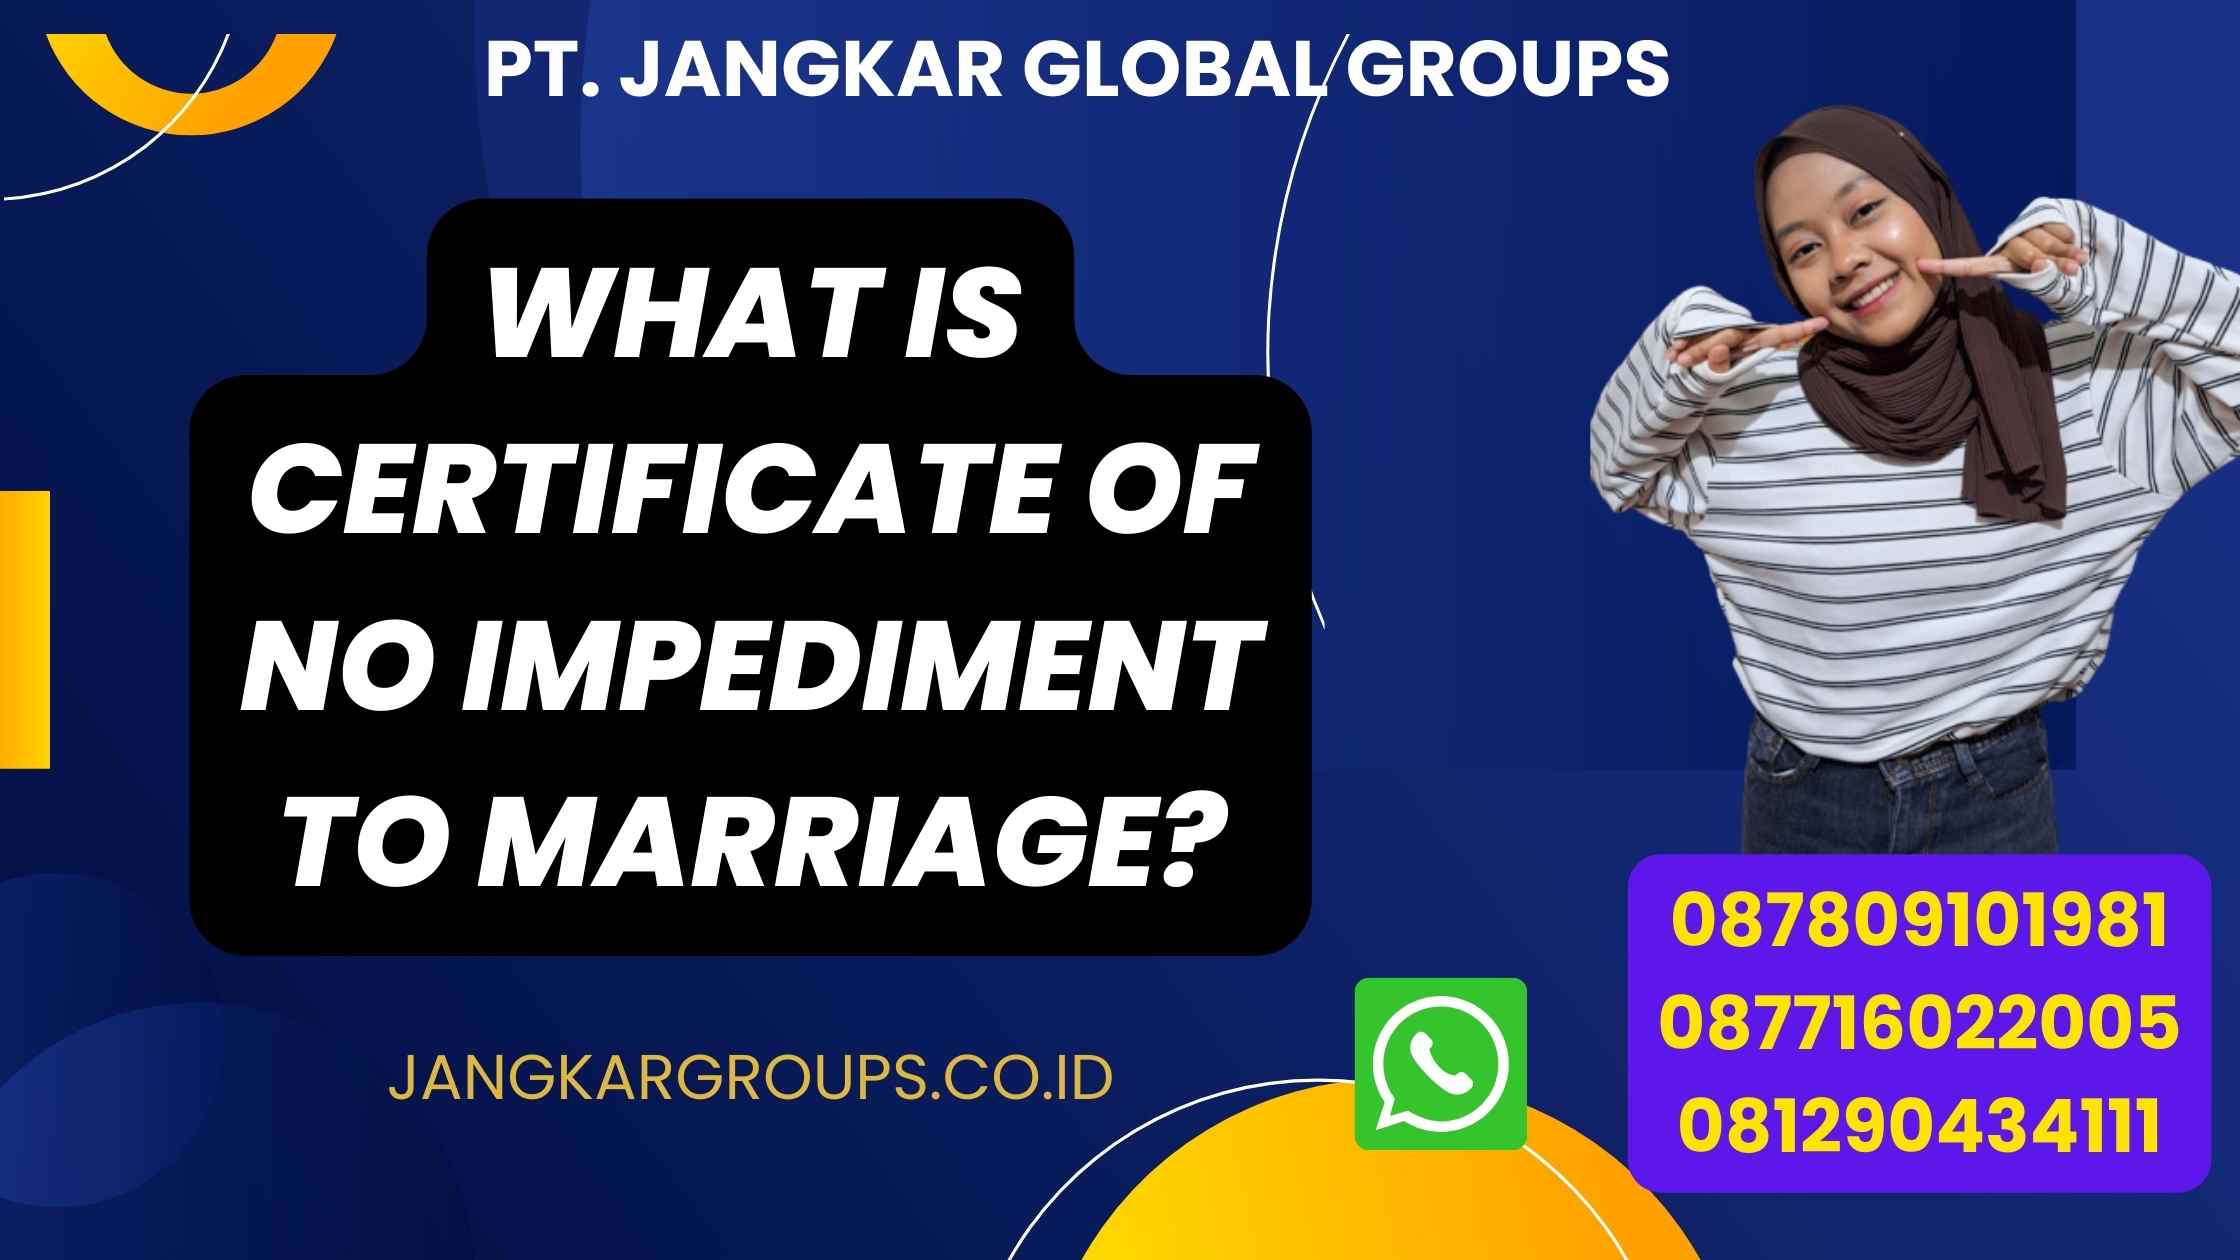 What is Certificate of No Impediment to Marriage?